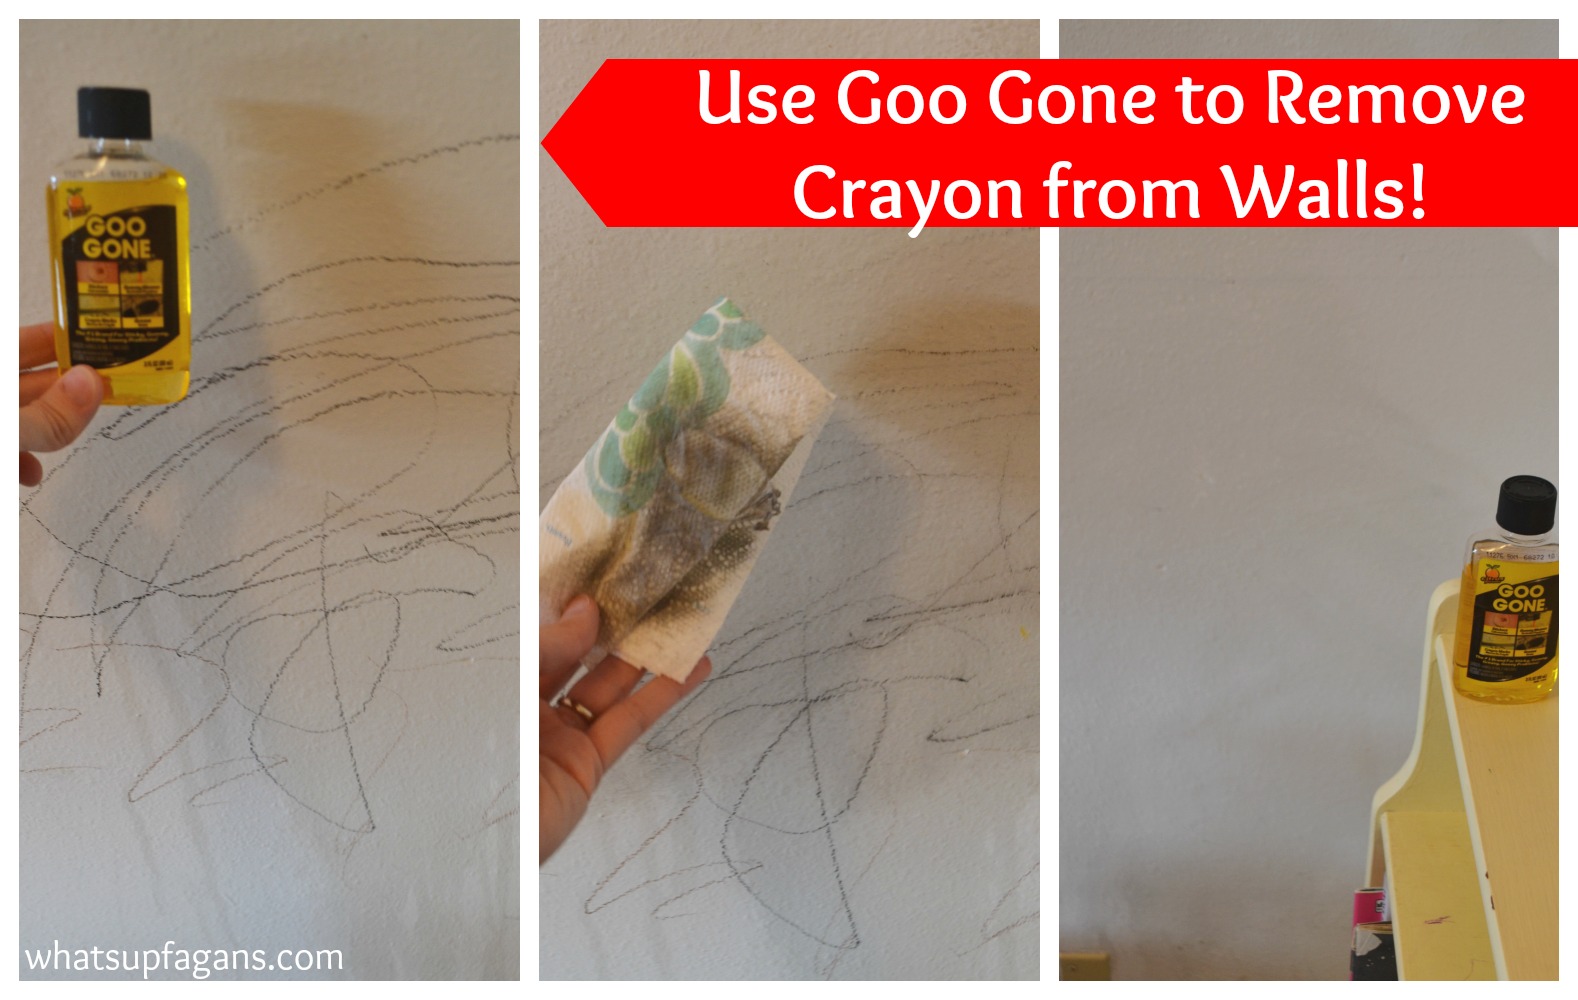 24 Methods that Actually Work to Remove Crayon from Walls